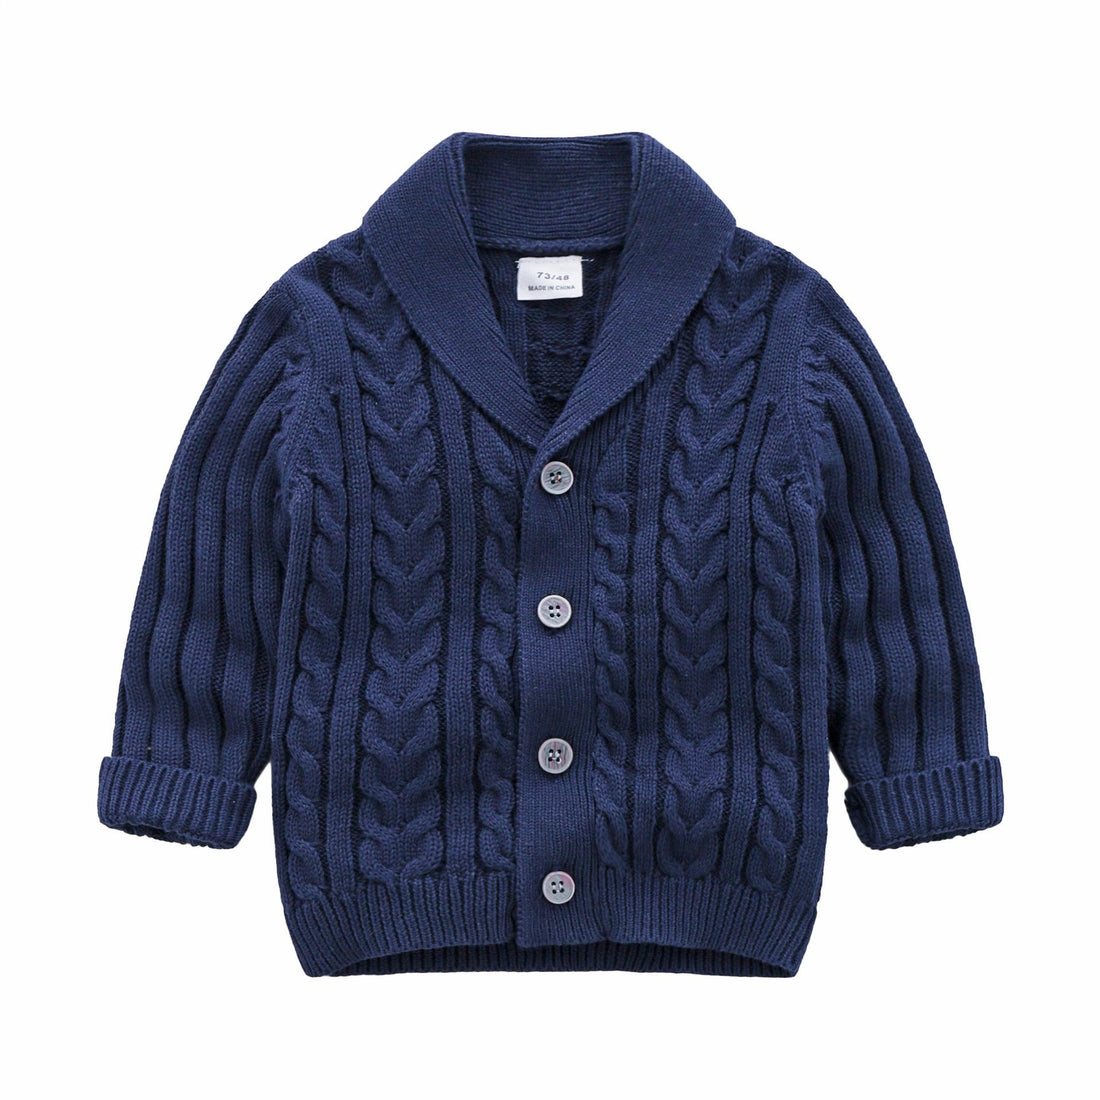 Baby Simple Sweater Knitted Cardigan Coat - Fashion - Your-Look